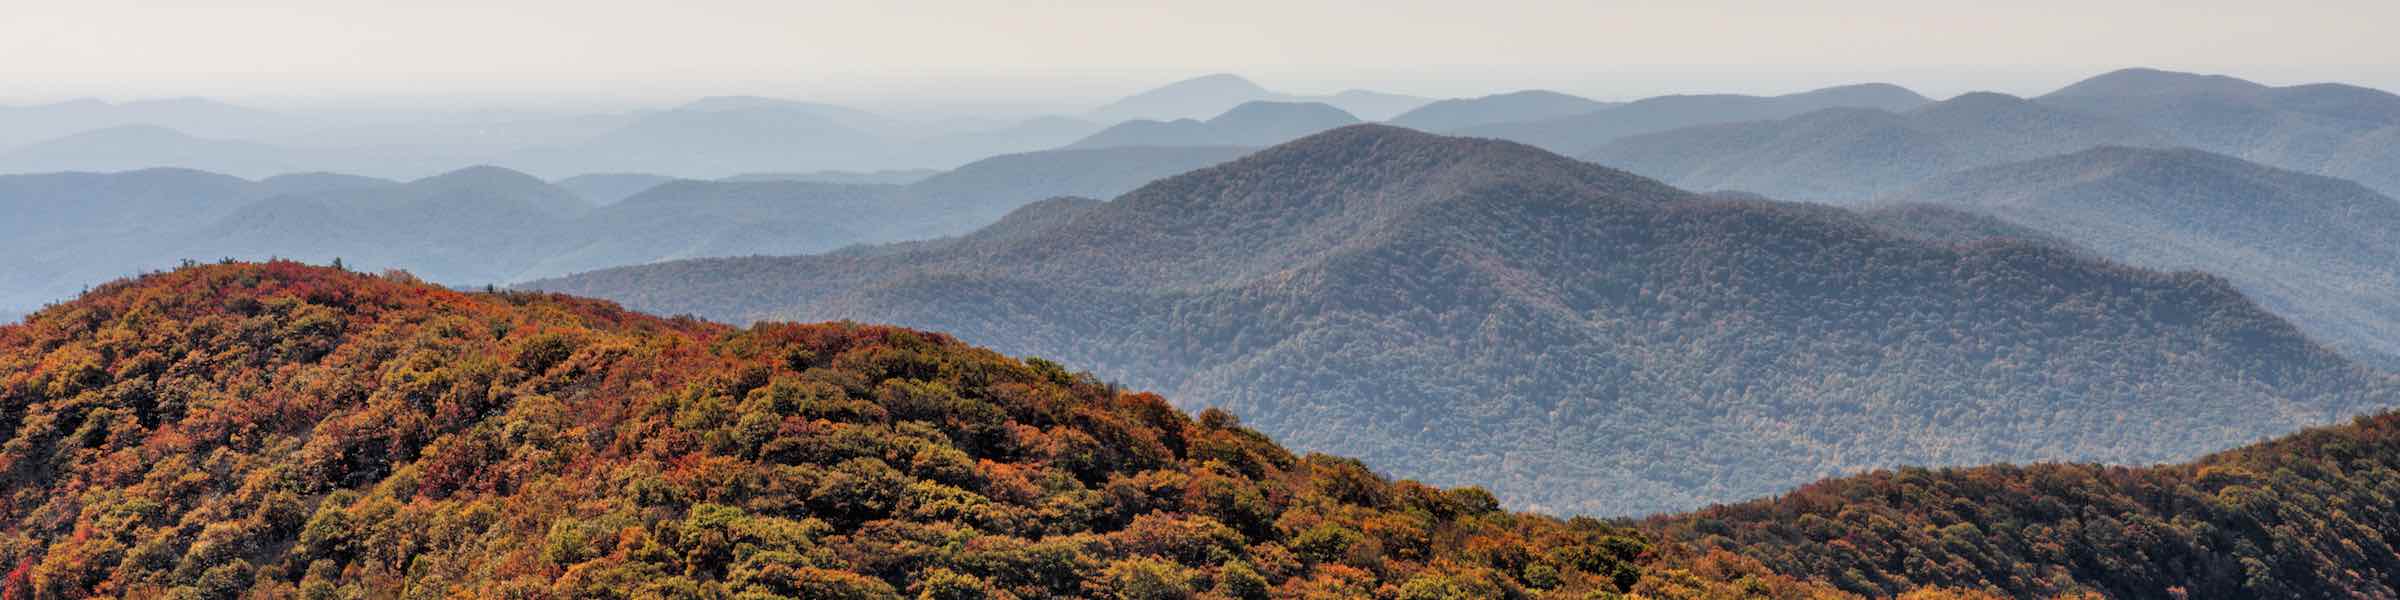 Fall colors in the North Georgia mountains, as seen from Brasstown Bald.